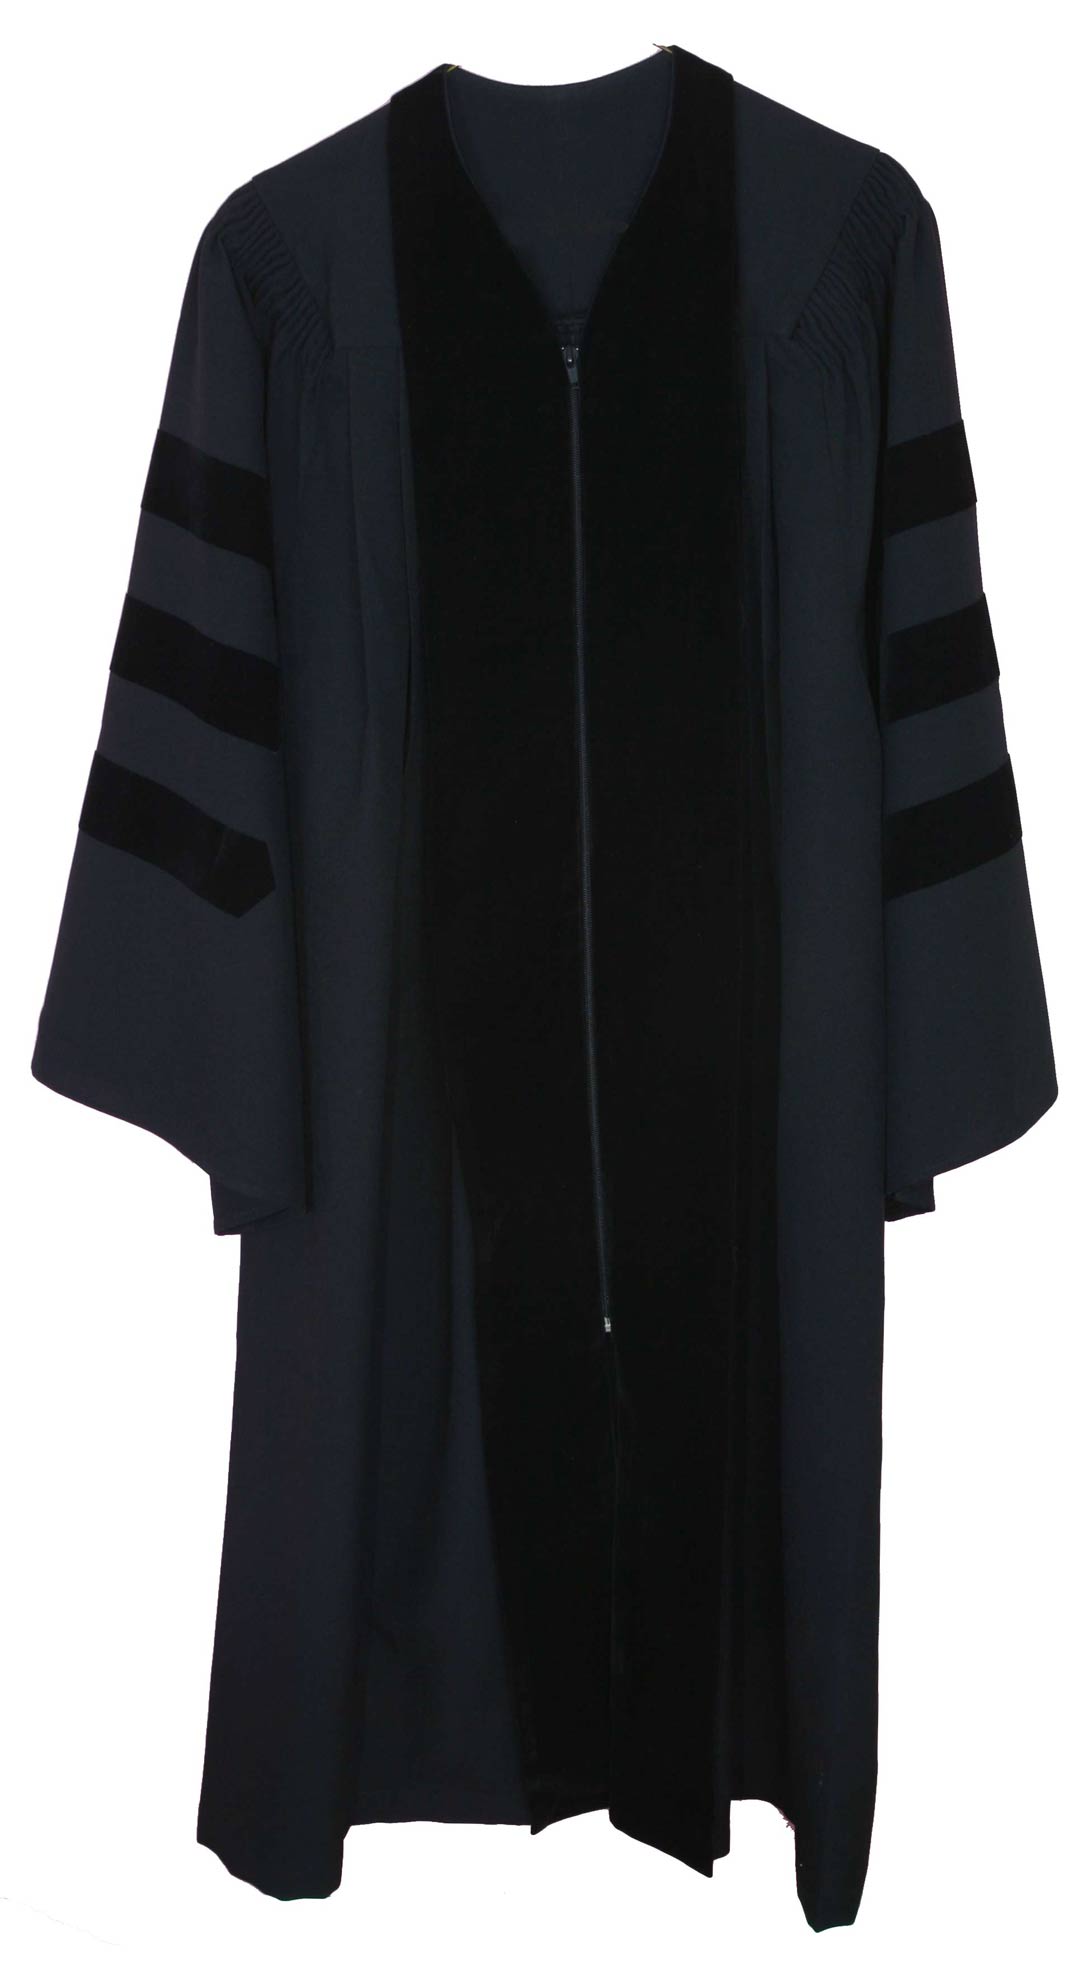 The Killer Wears A Skeleton Mask And A Graduation Gown. This Is Graduation Gown. - Graduation Gown, Transparent background PNG HD thumbnail